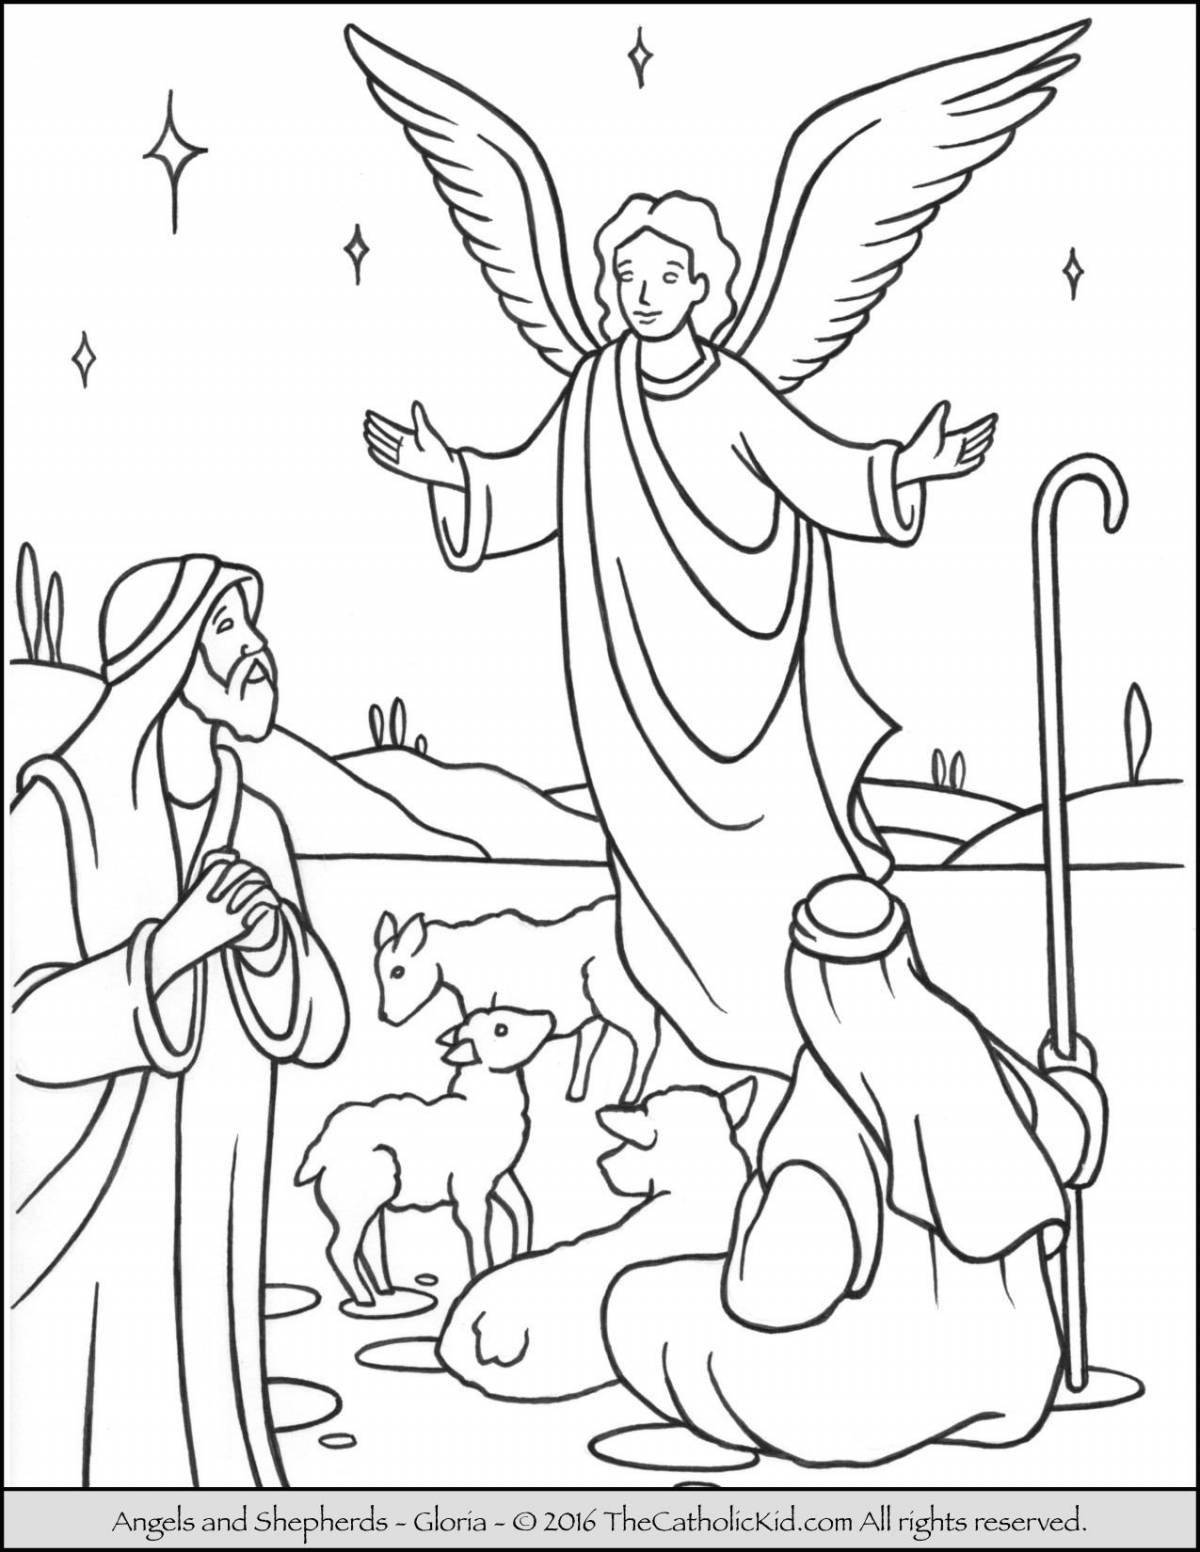 Great Christmas coloring book for Sunday school kids